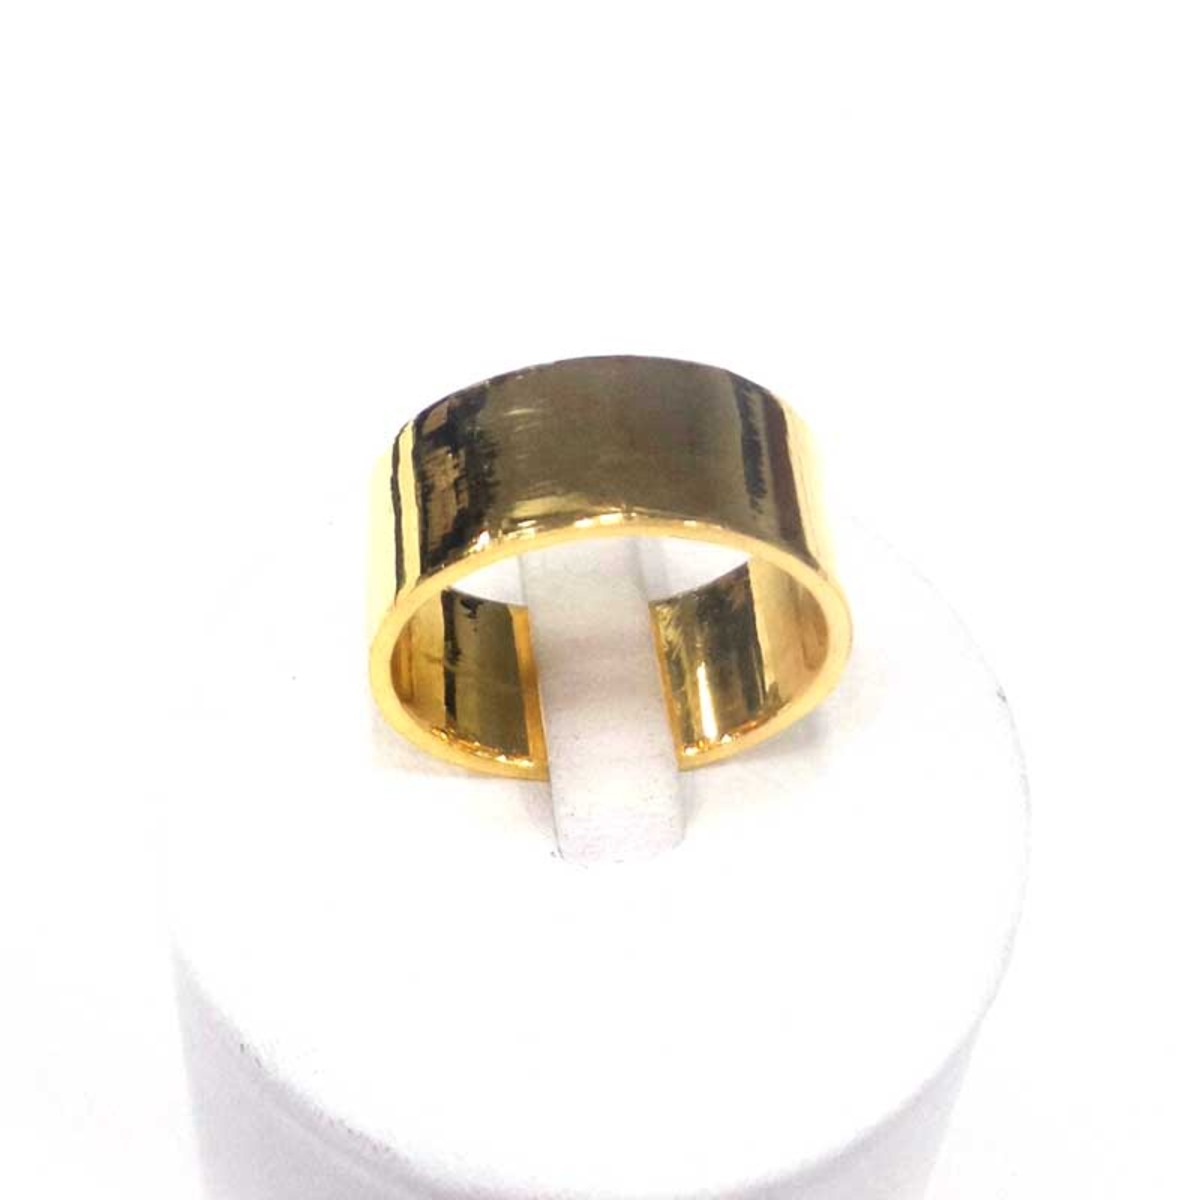 New 24k Pure Gold Rings For Men Women Hip Cocktail Party Jewelry Yellow Gold  Color-11 - Rings | Facebook Marketplace | Facebook